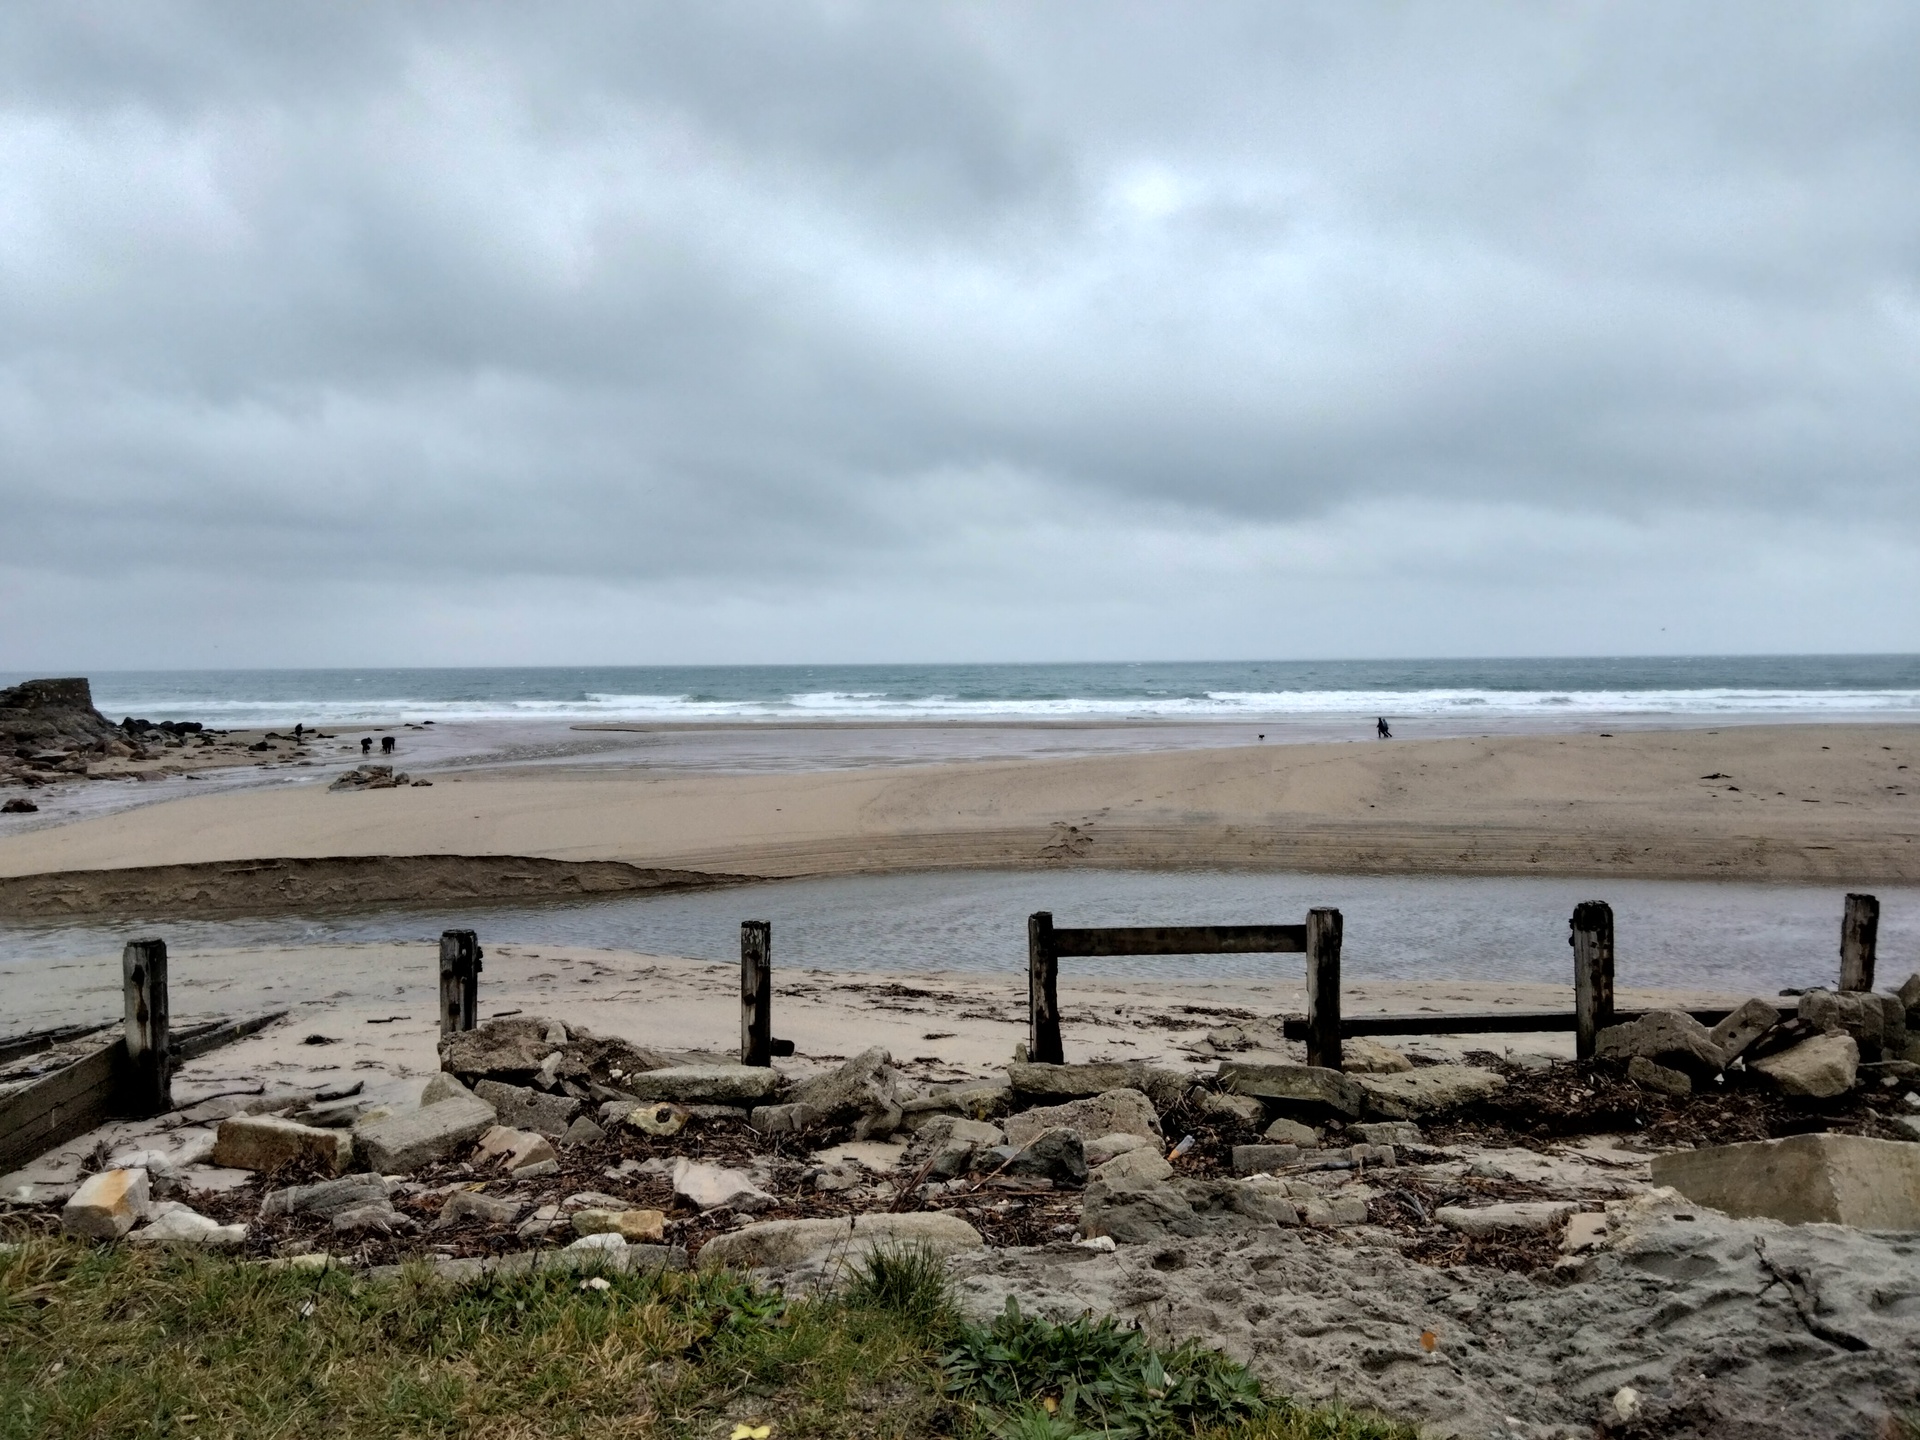 OnePlus Nord N100 photo sample of a beach front